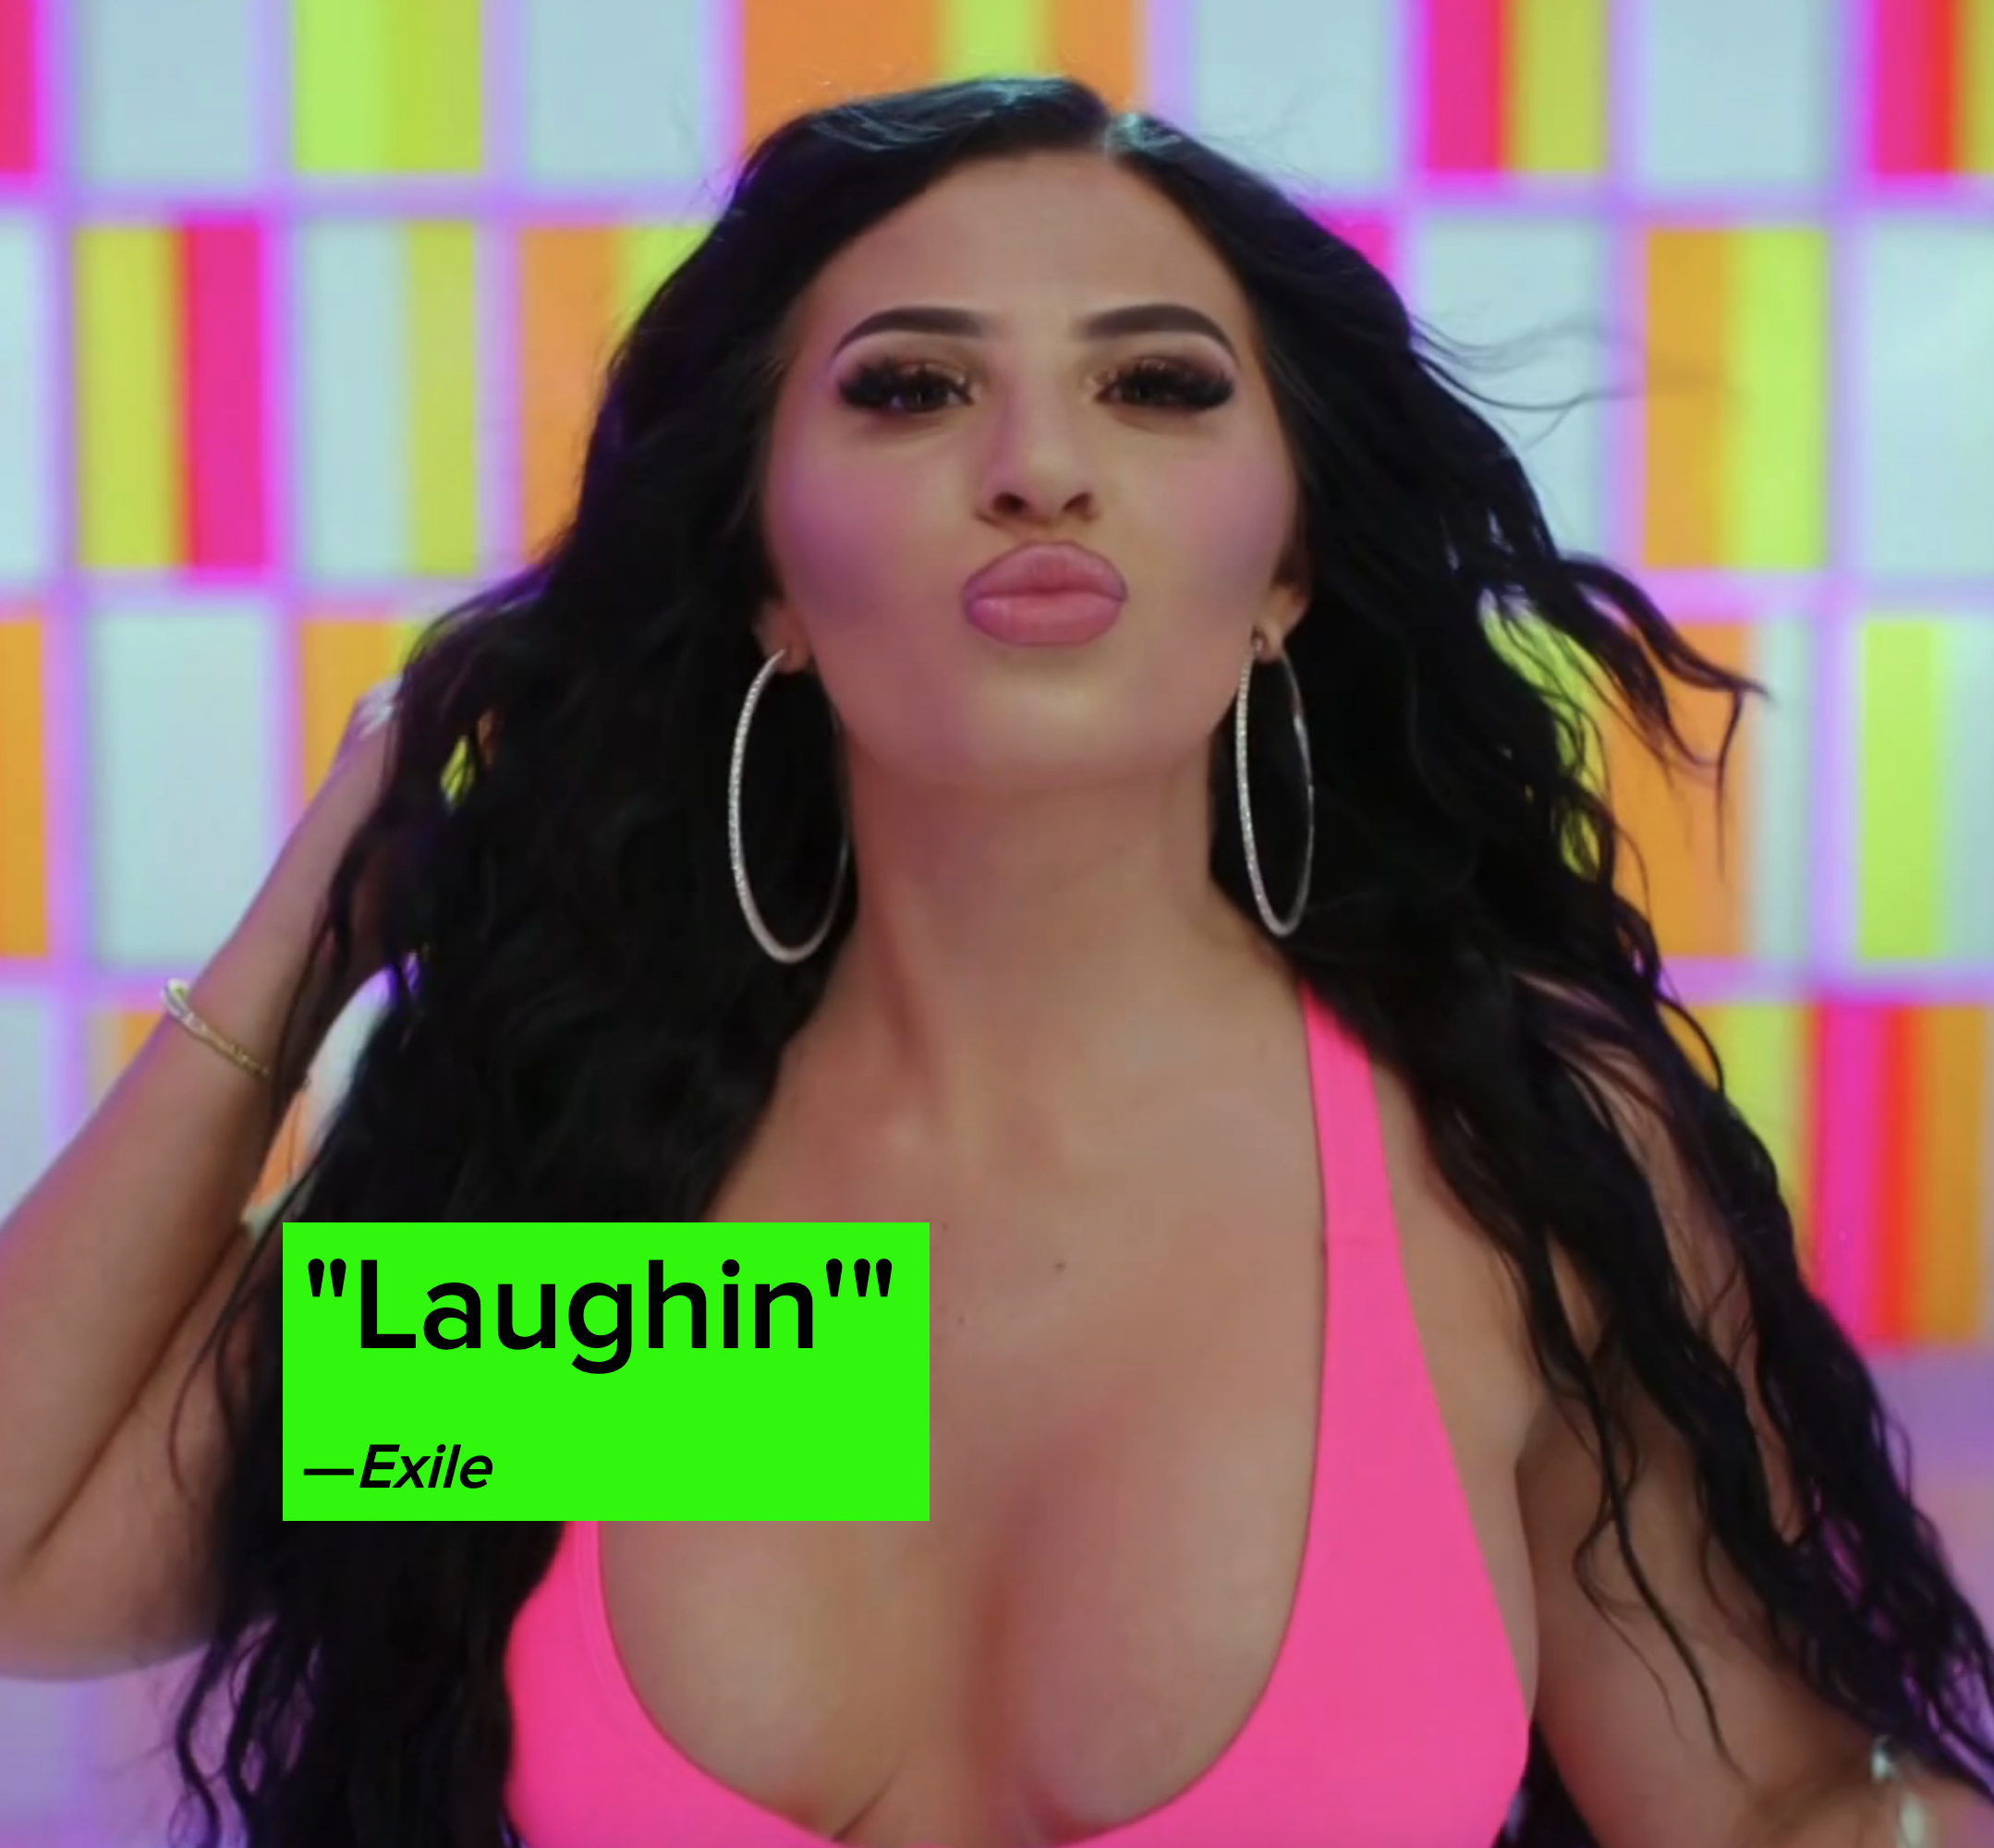 Hannah with long wavy black hair and large hoop earrings, poses against a colorful background, wearing a low-cut top